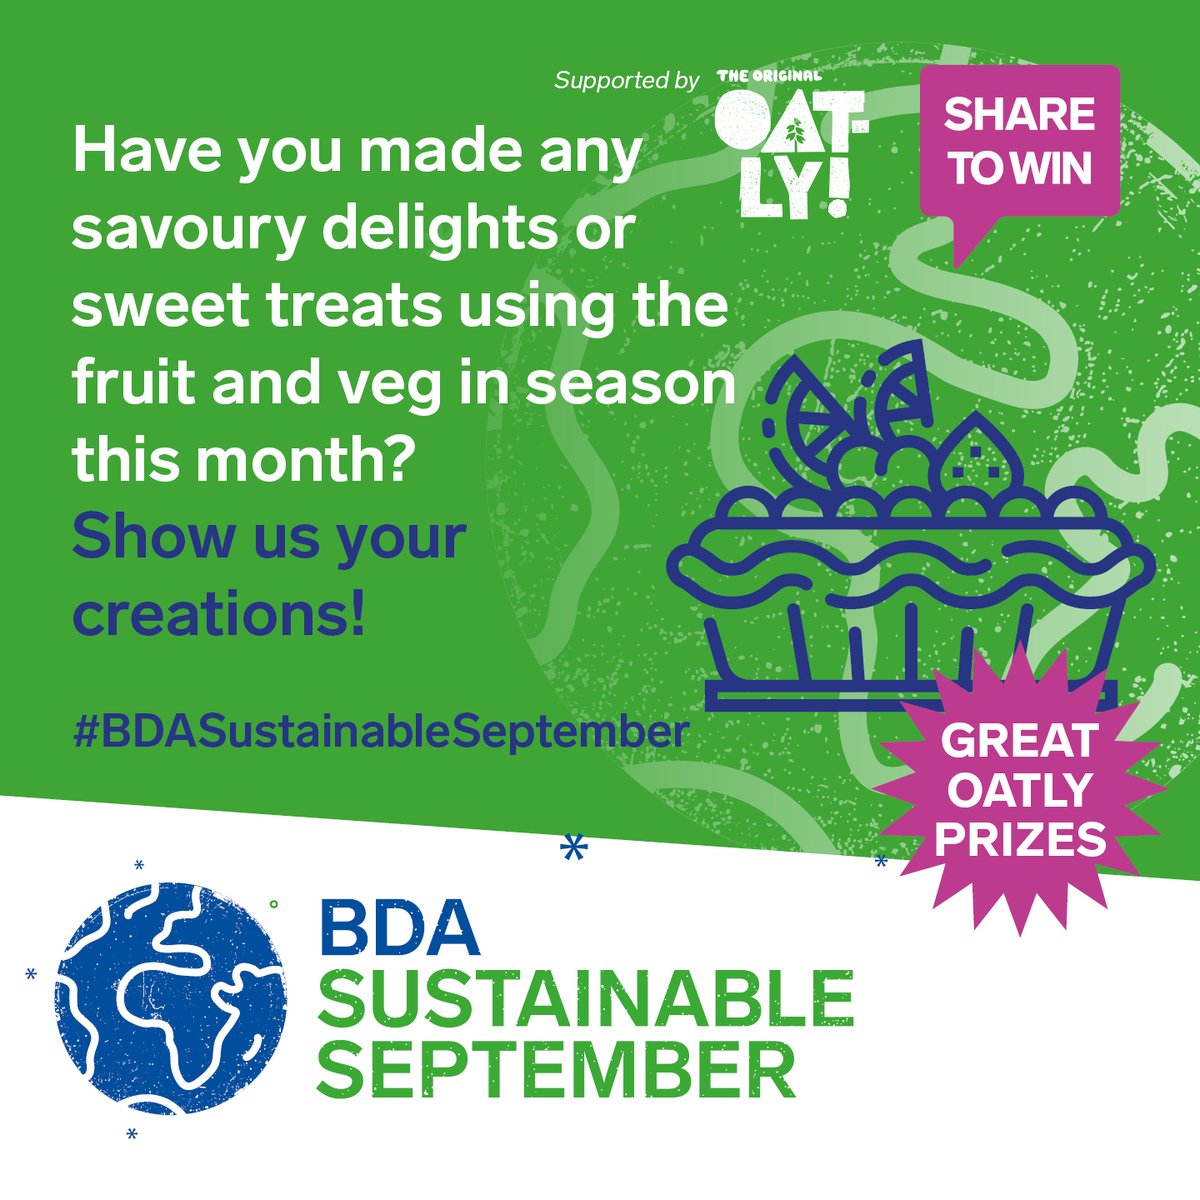 It's your last chance to WIN with @Oatly. Have you made any savoury delights or sweet treats using the fruit and veg in season this month? Show us your creations! 😍 Our favourite will win an @oatly prize! #BDASustainableSeptember